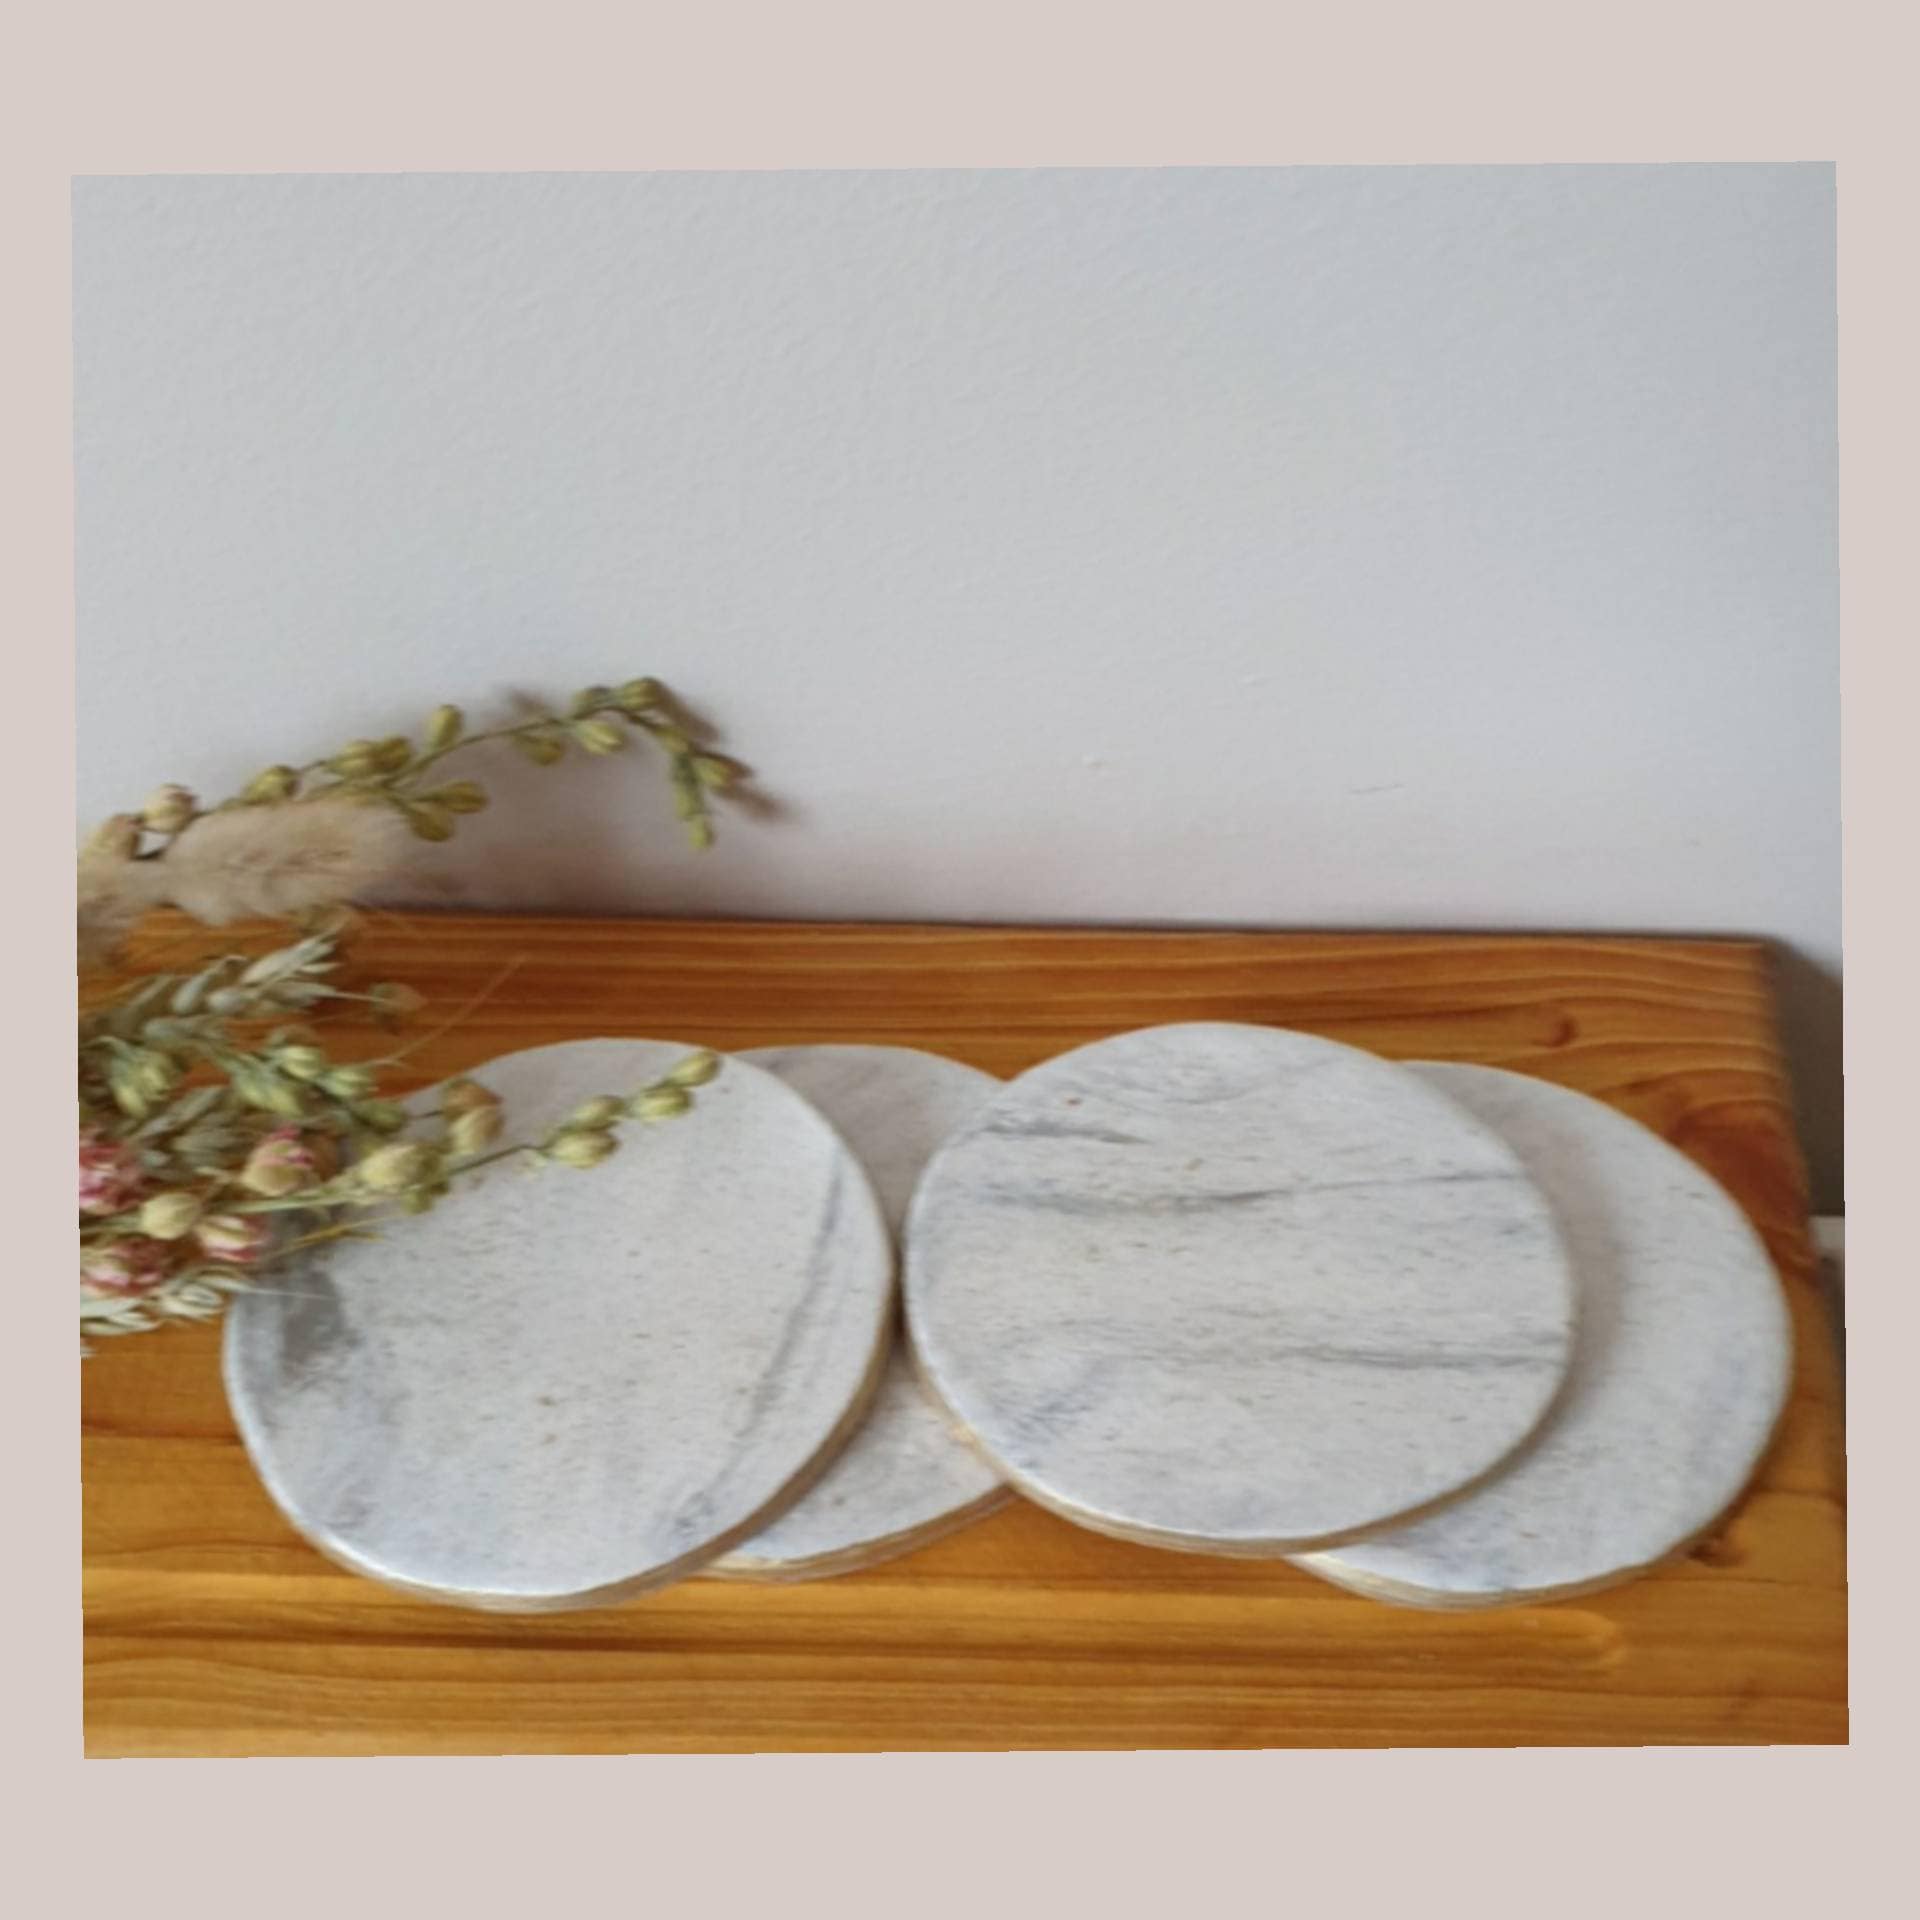 Coasters for Drinks Set of 6 Coaster White Square Marble Coasters for  Drinks Marble Decors White Marble Coaster for Home Decor